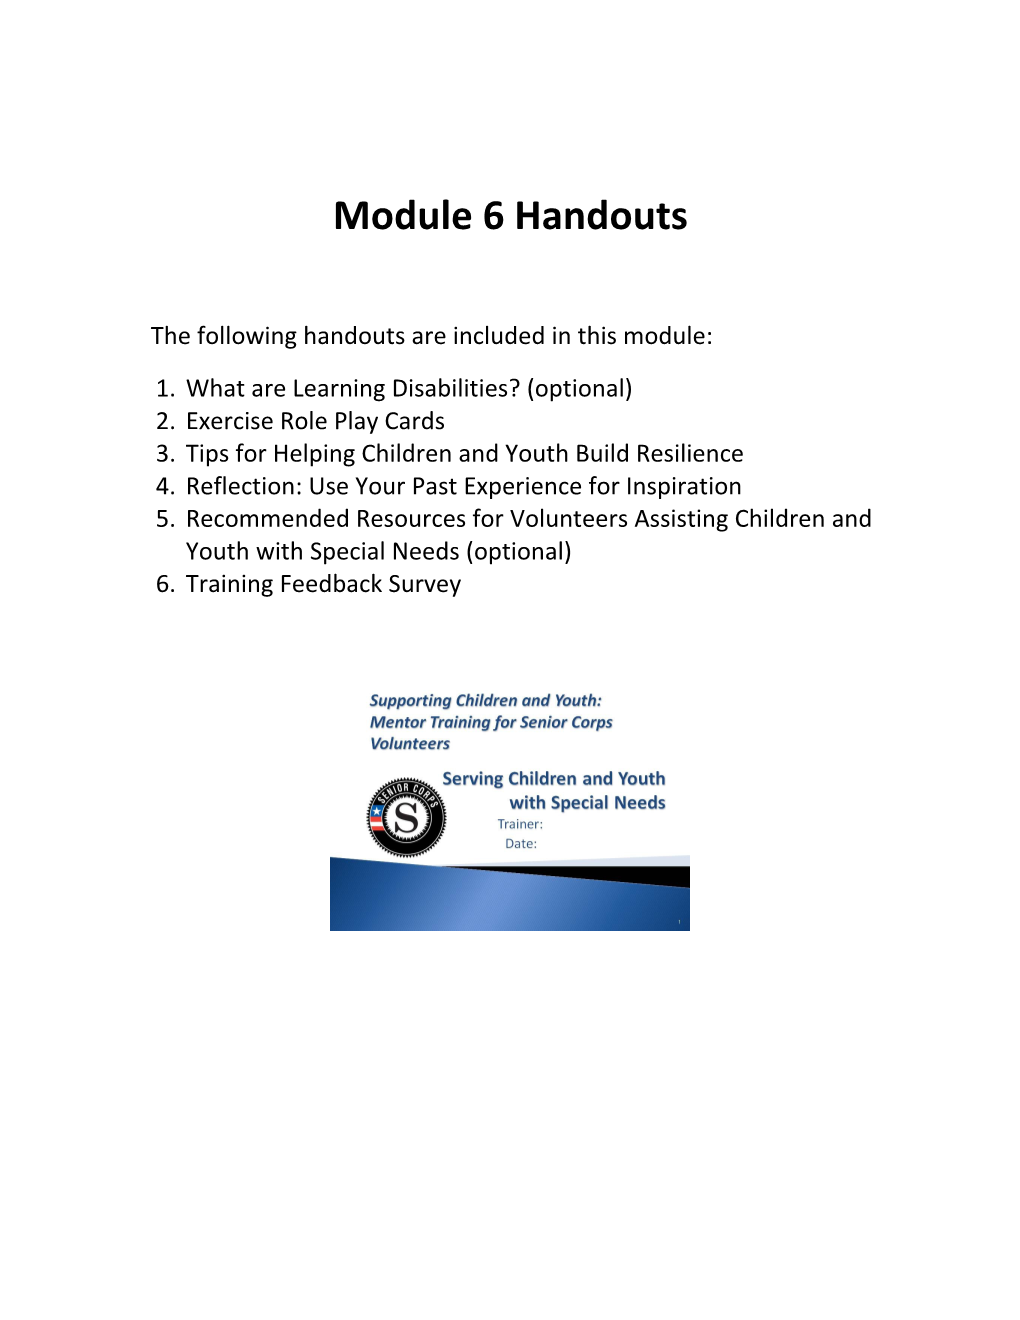 The Following Handouts Are Included in This Module